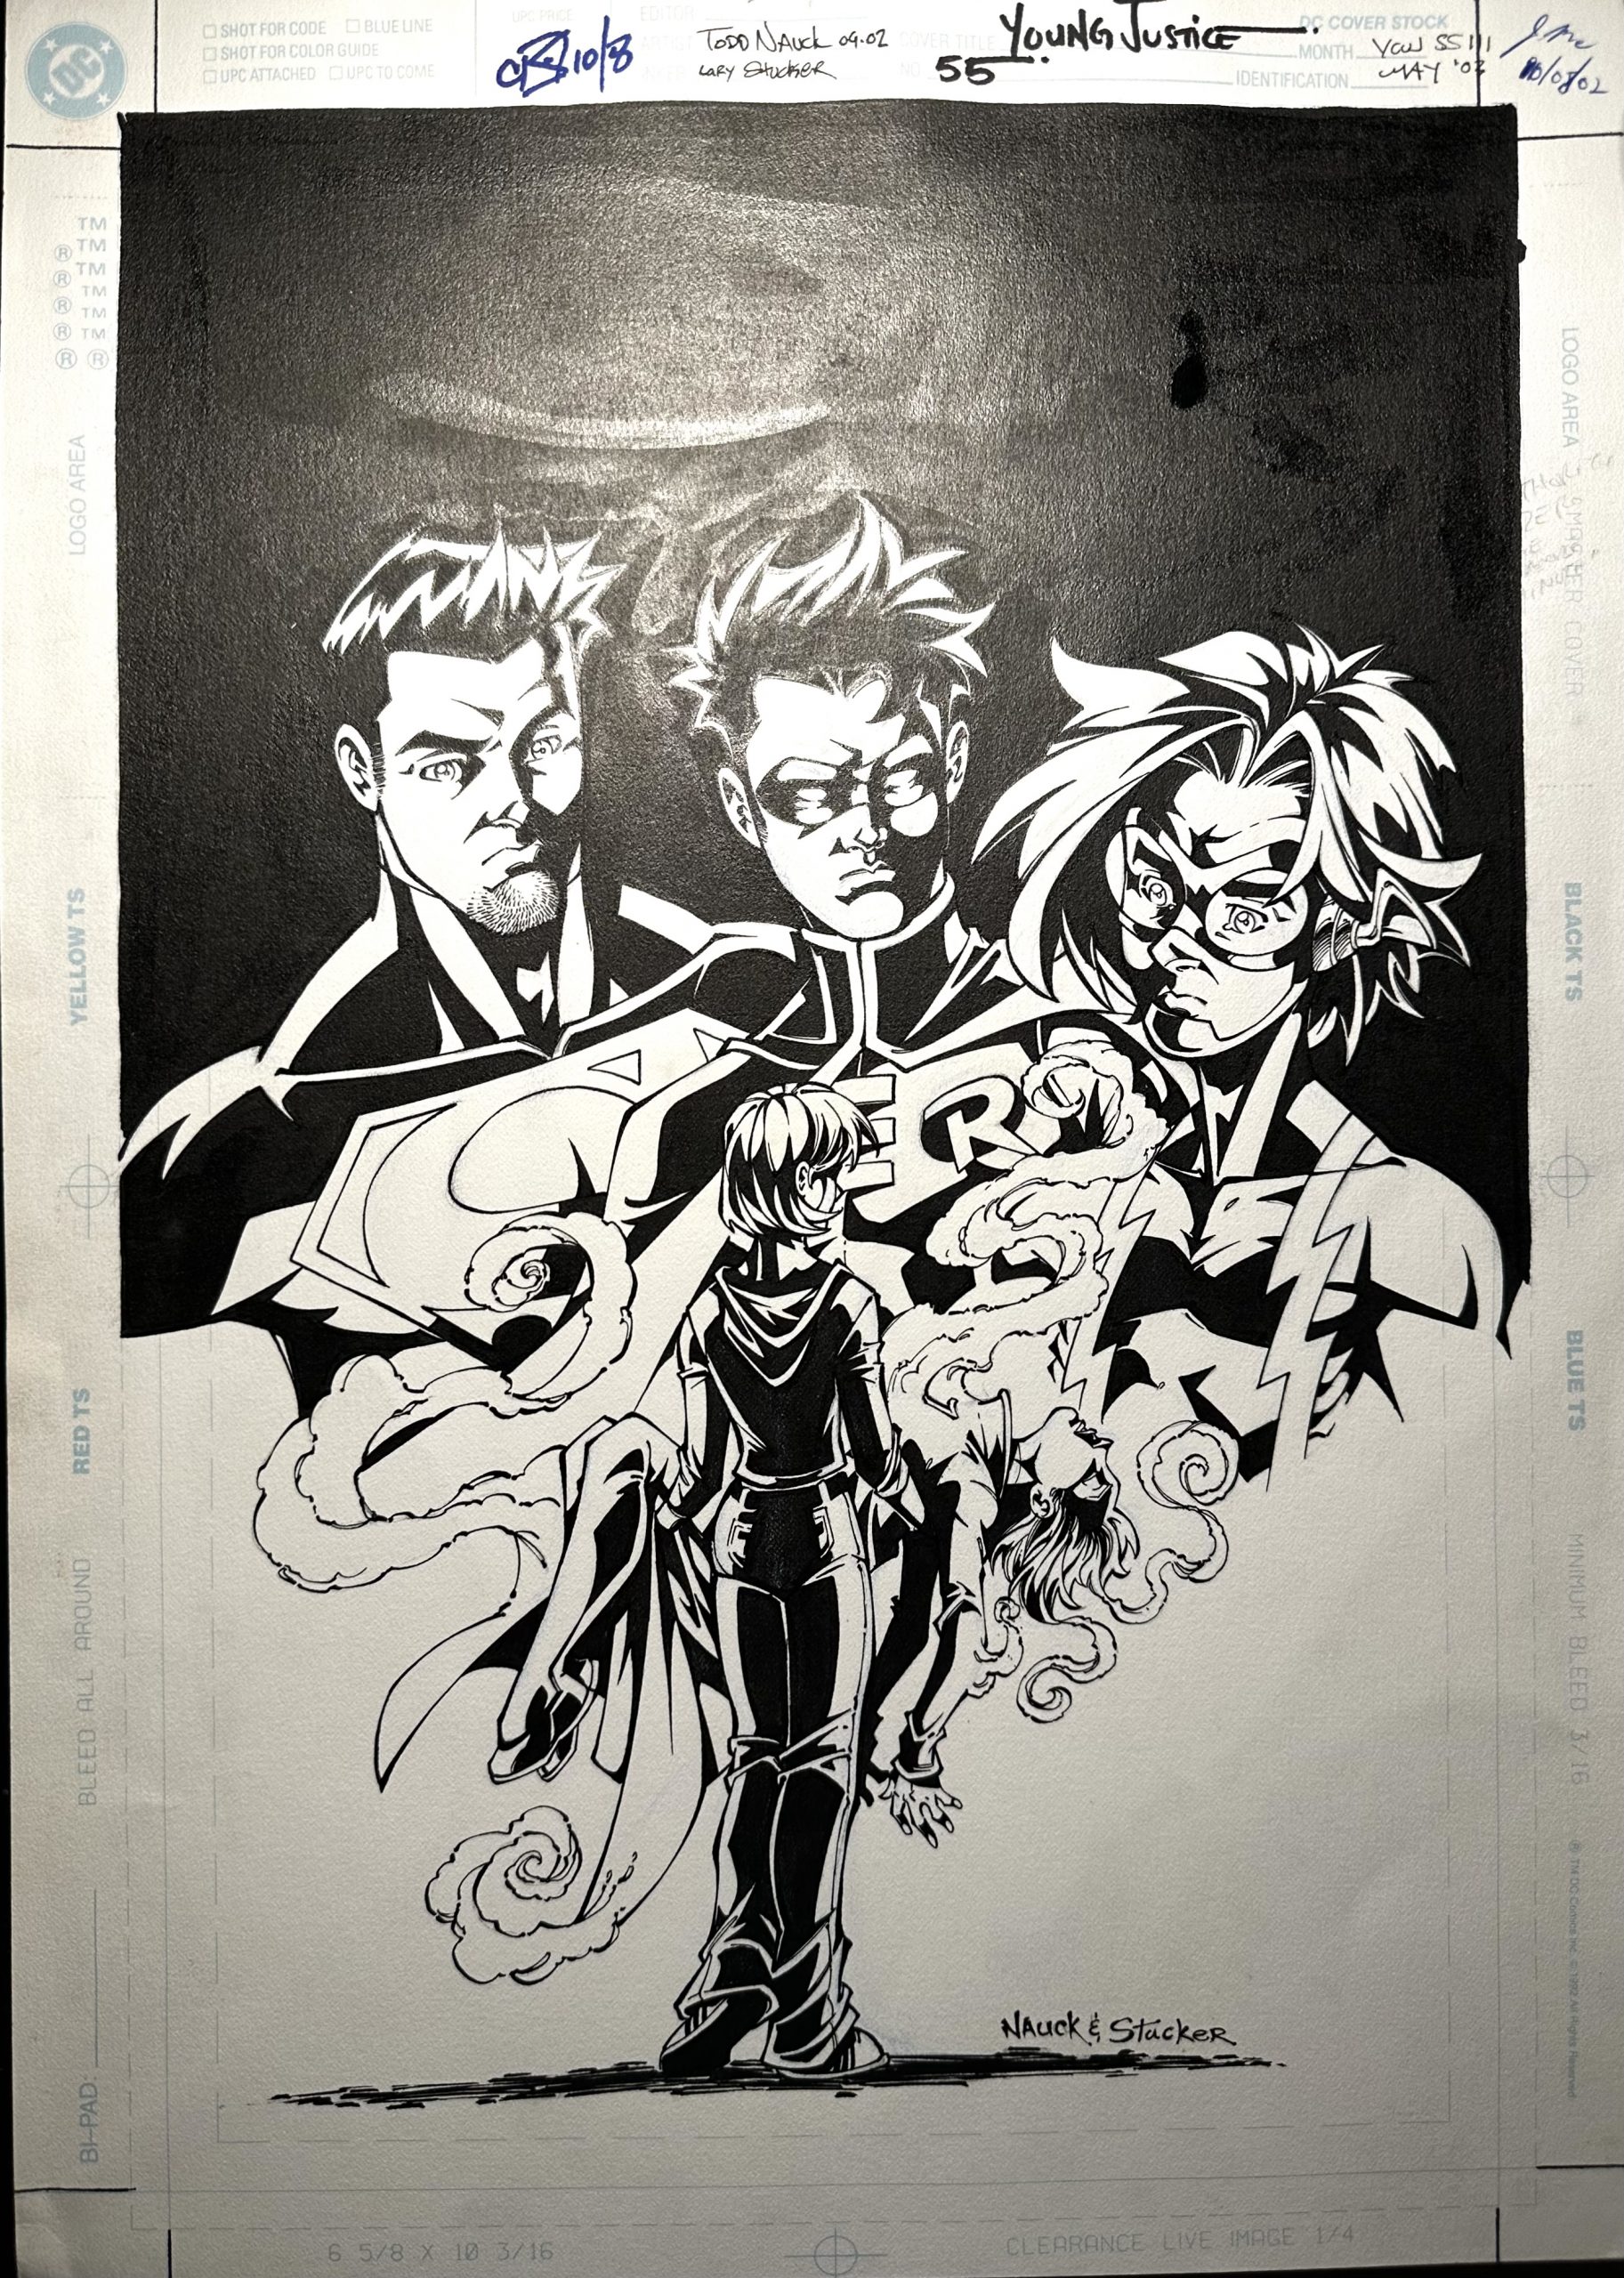 Original artwork cover for Young Justice issue 55 by Todd Nauck and Lary Stucker